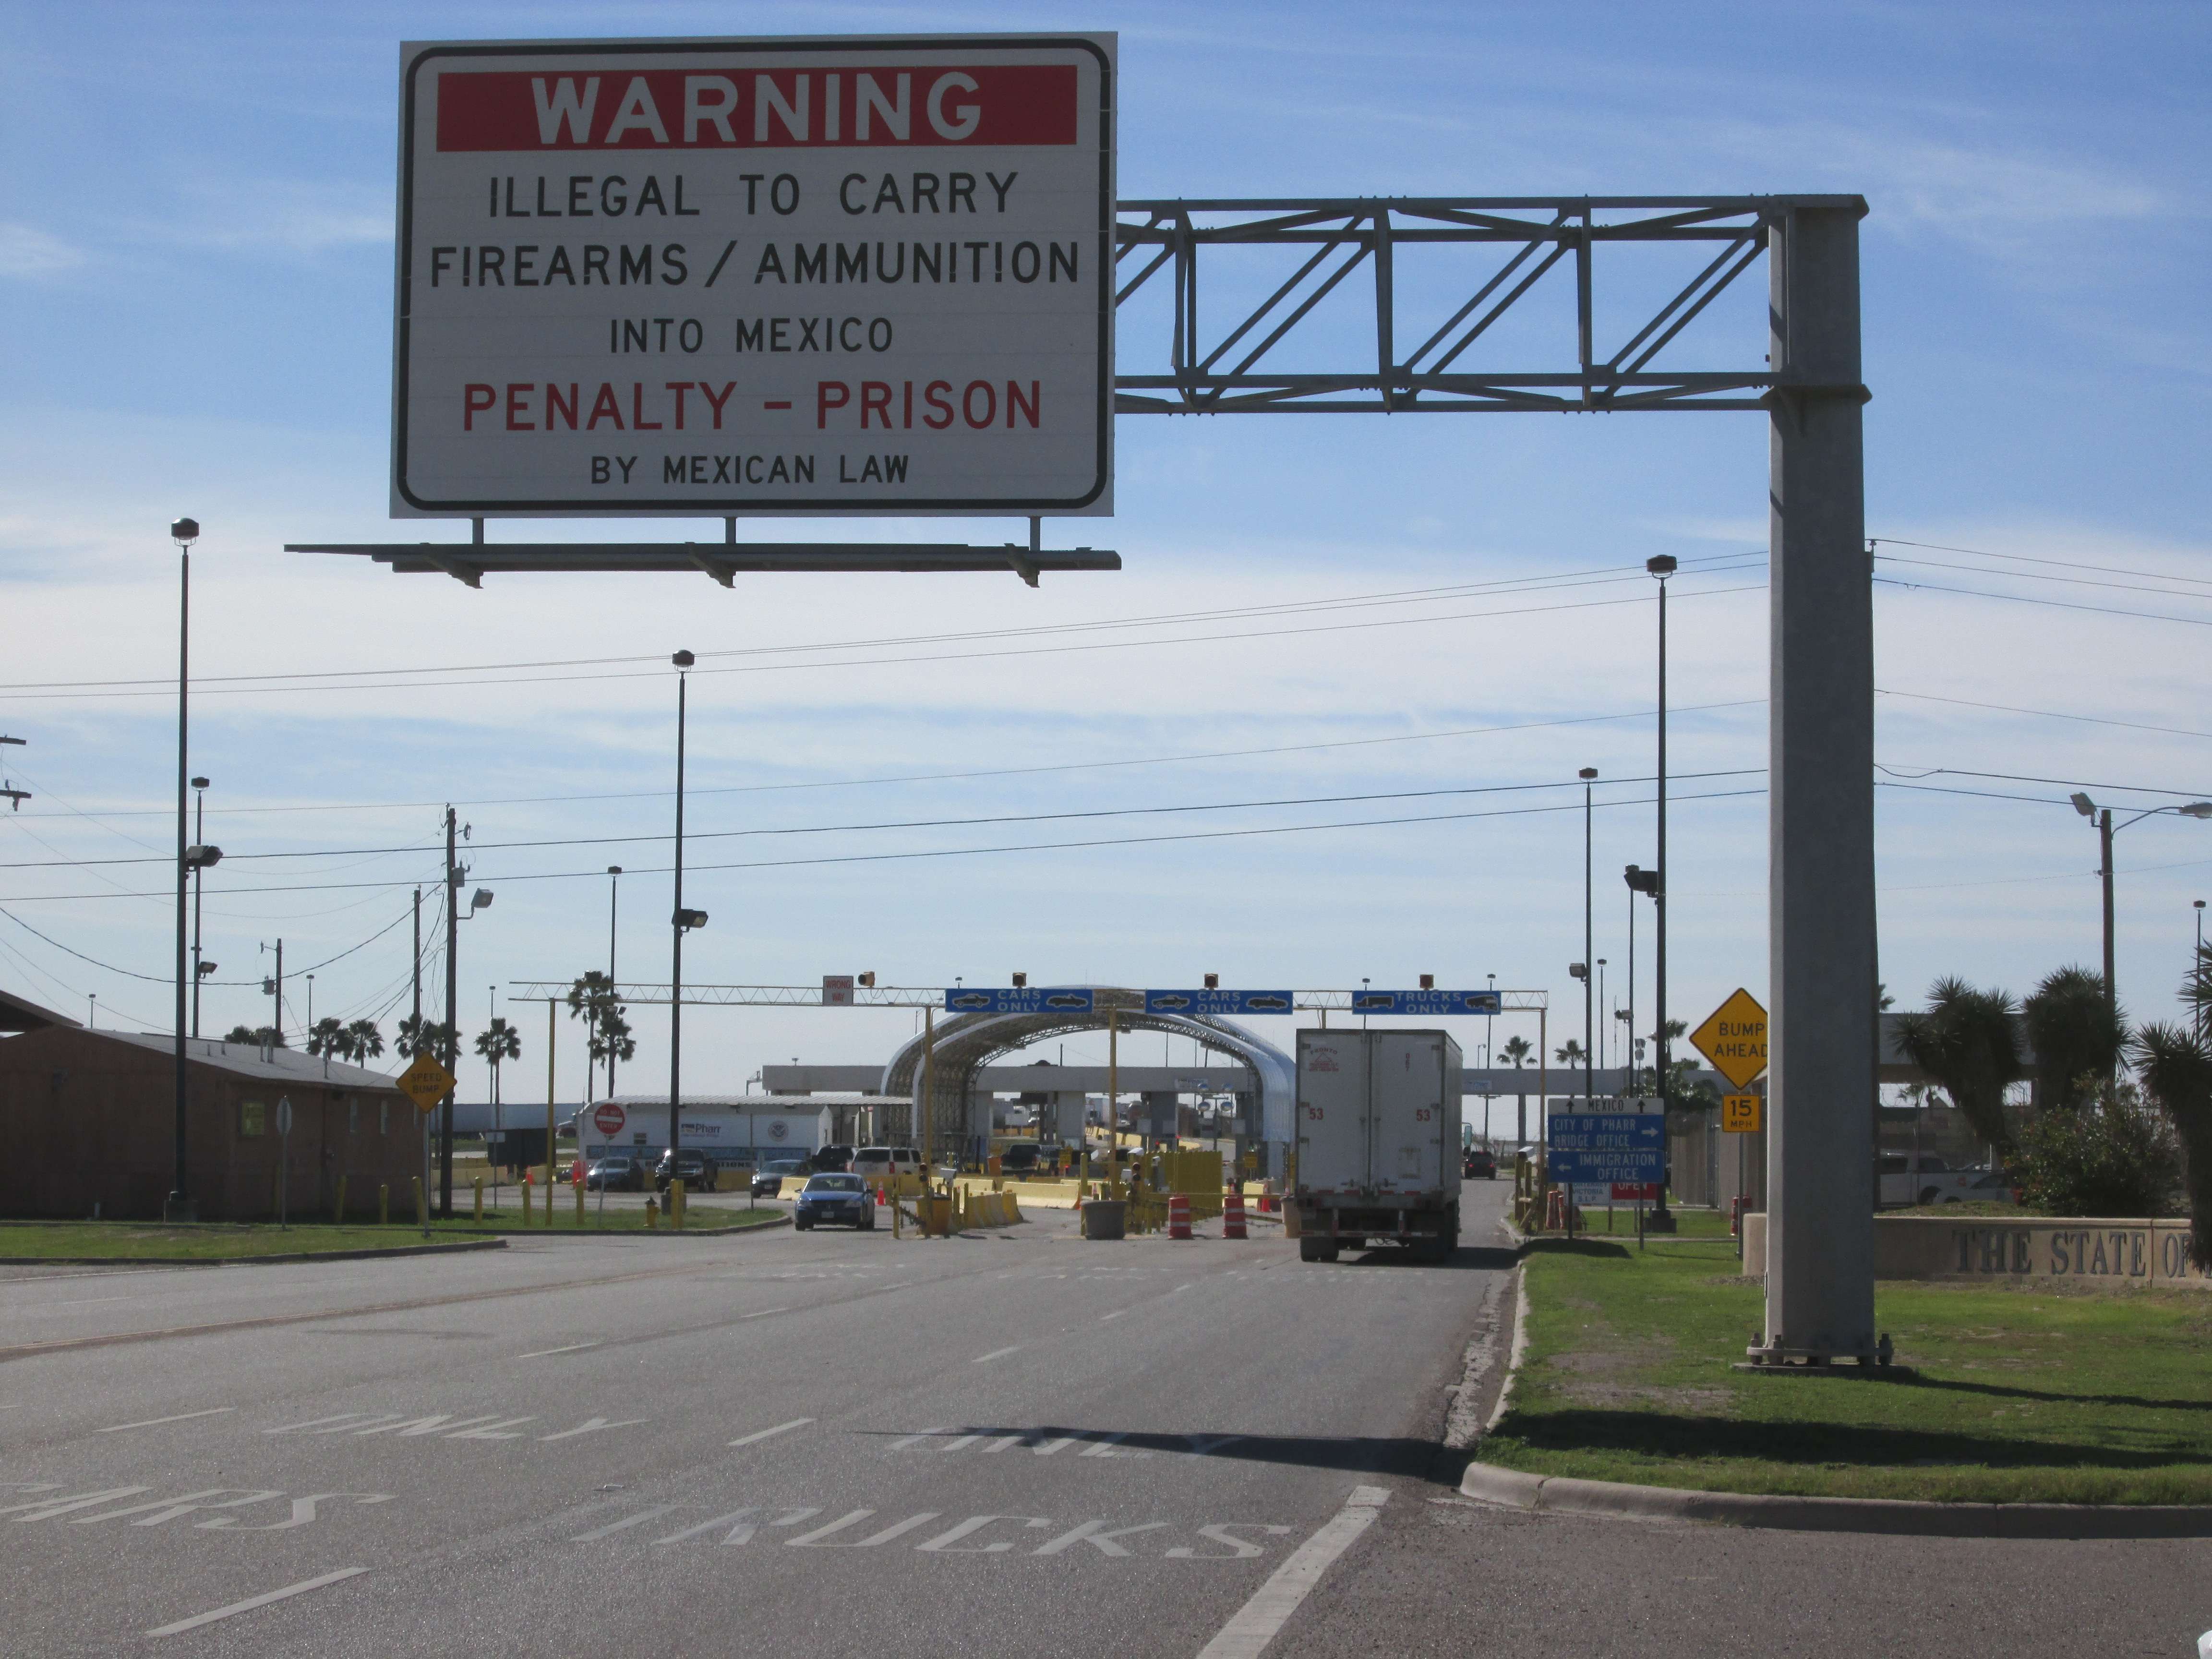 A photo of the Mexican border.  A large sign reads "WARNING | ILLEGAL TO CARRY FIREARMS / AMMUNITION INTO MEXICO | PENALTY - PRISON | BY MEXICAN LAW"